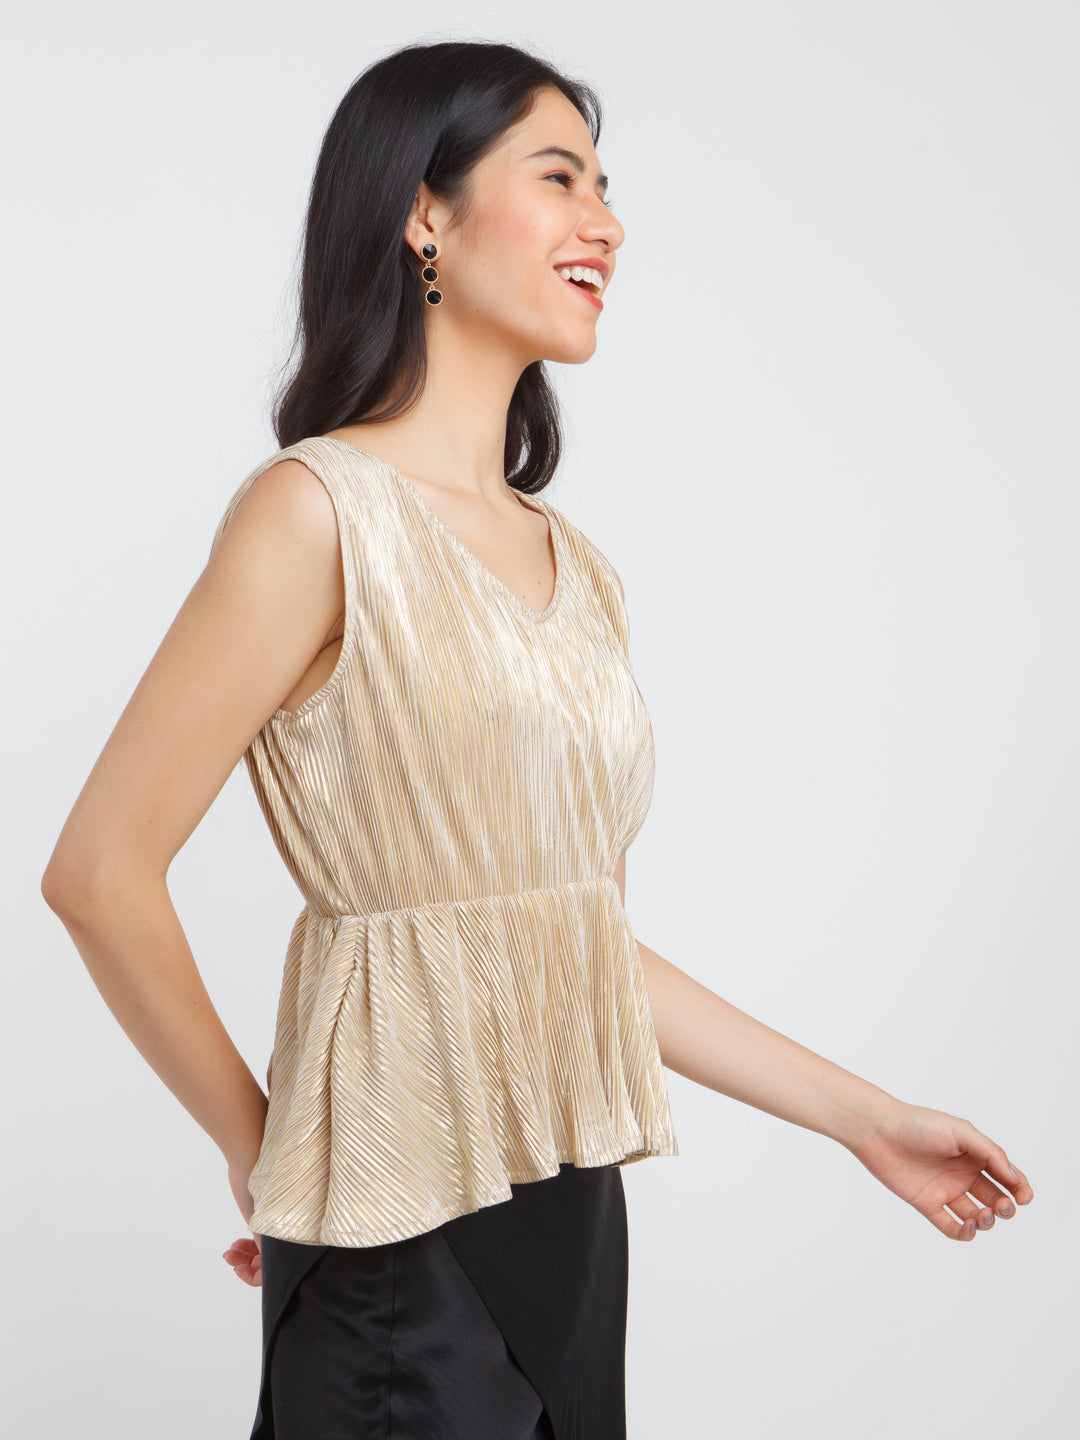 Gold Striped Top For Women